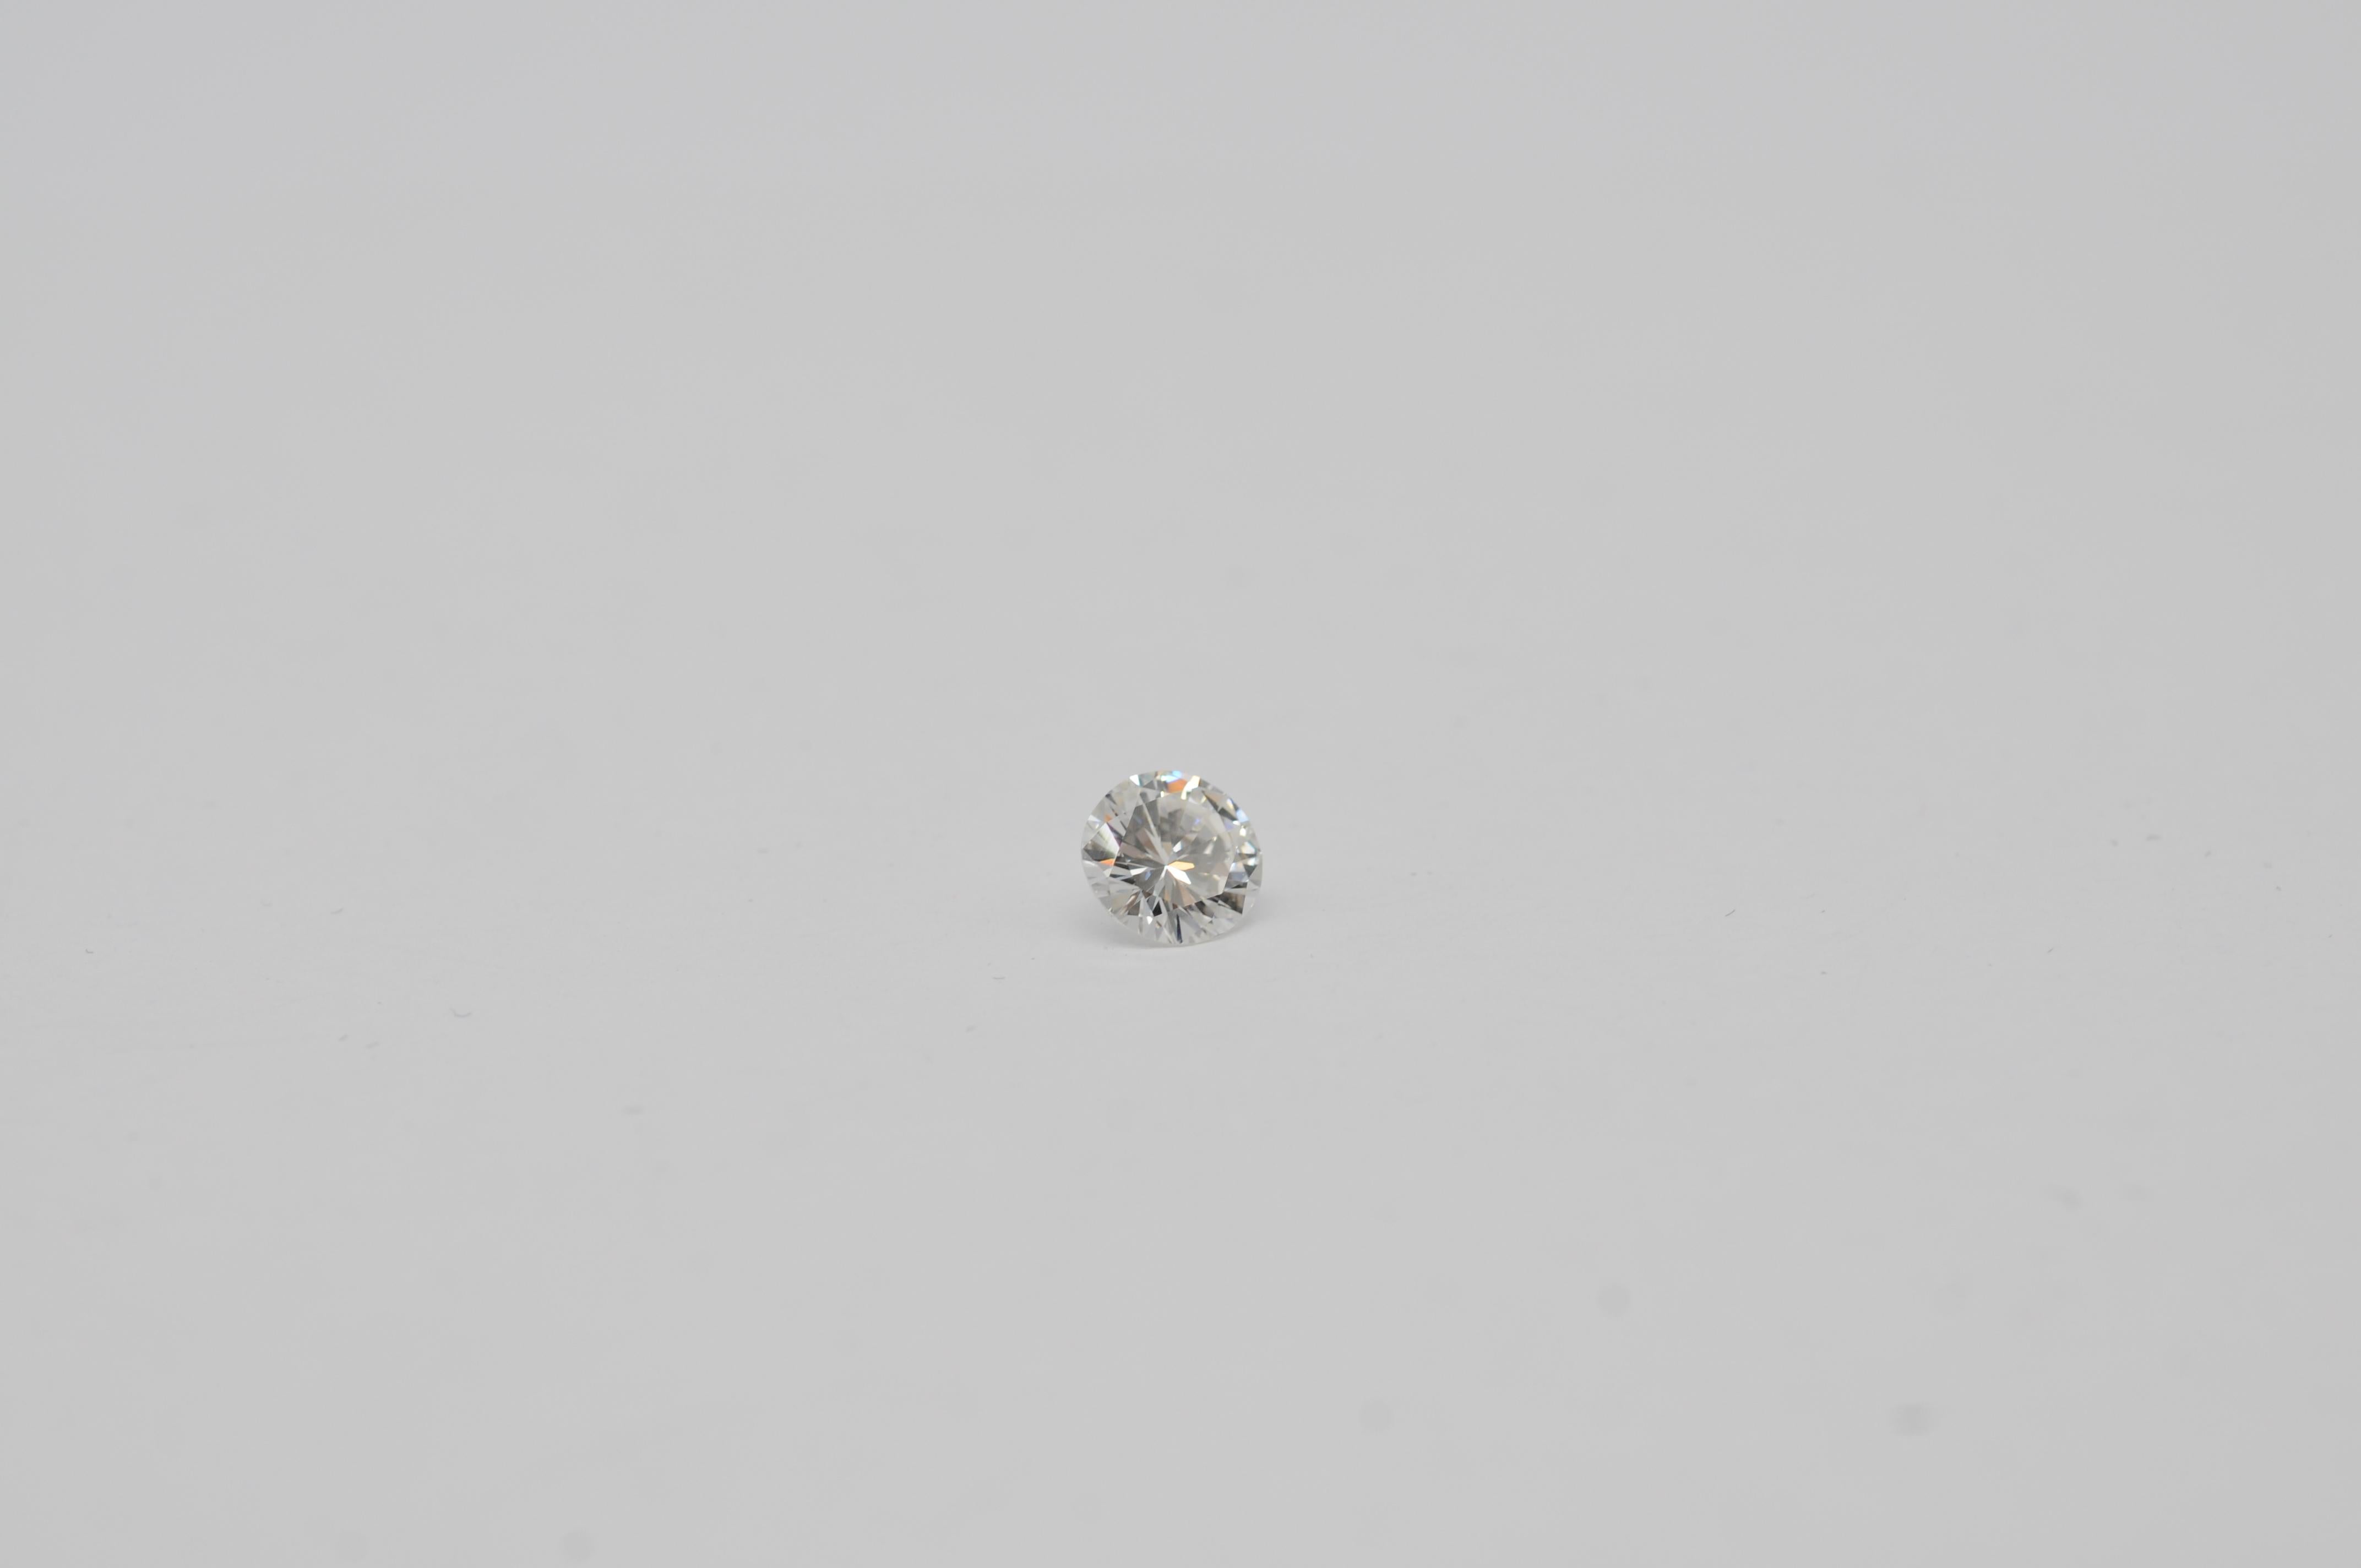 Brilliant Cut  Diamond clarity:(IF) internally flawless color: top wesselton 1.06ct For Sale